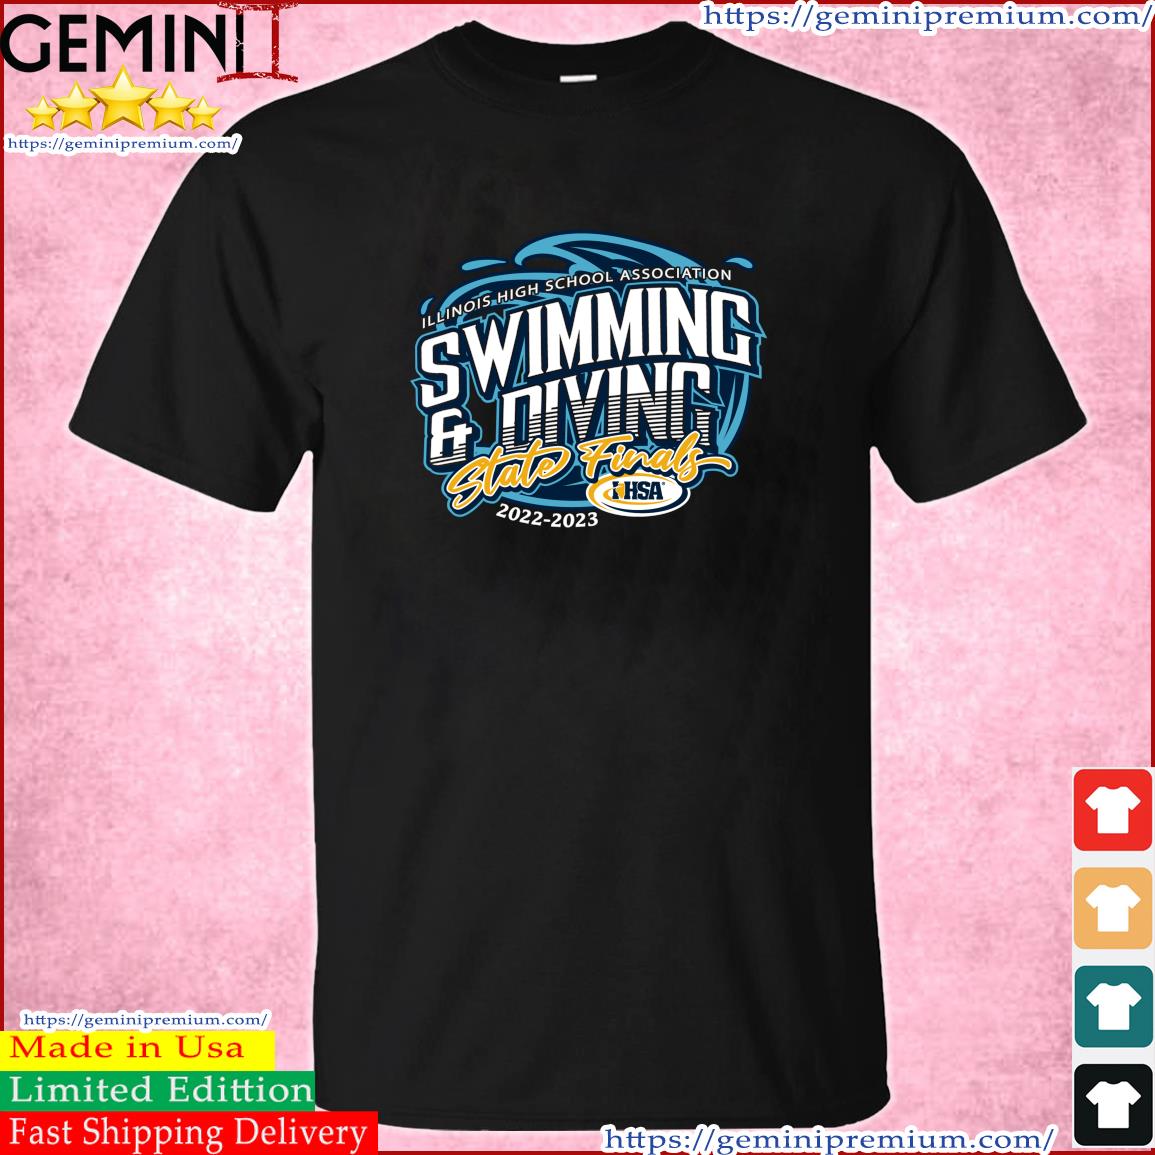 2022-2023 IHSA Swimming and Diving State Finals Illinois High School Association Shirt